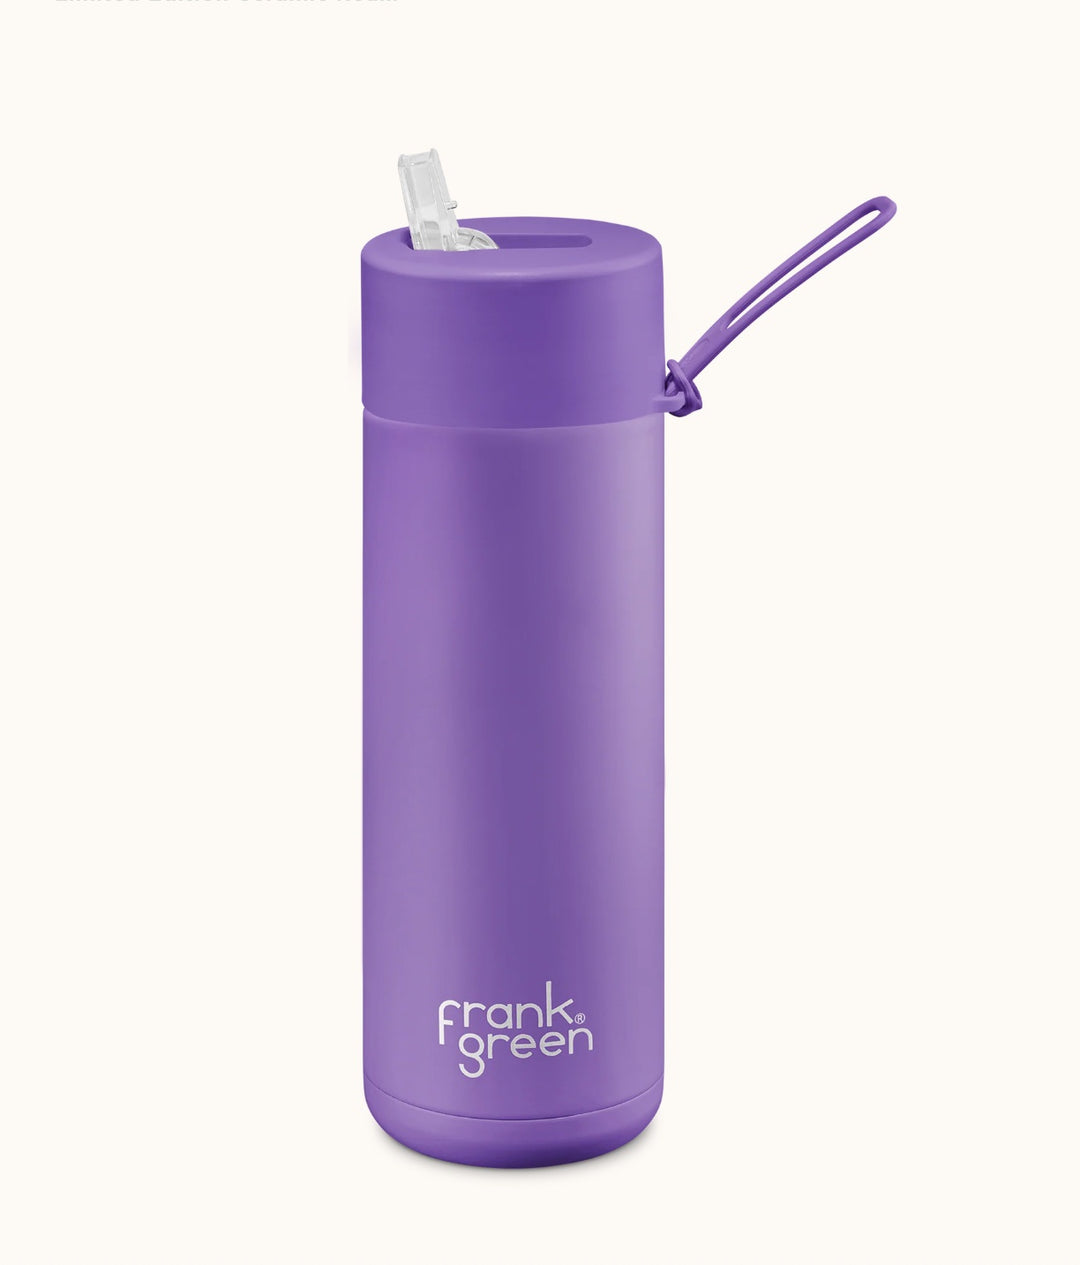 Limited Edition 20oz Stainless Steel Ceramic Reusable Bottle Cosmic Purple with Straw Lid Hull Drink Bottles Frank Green   